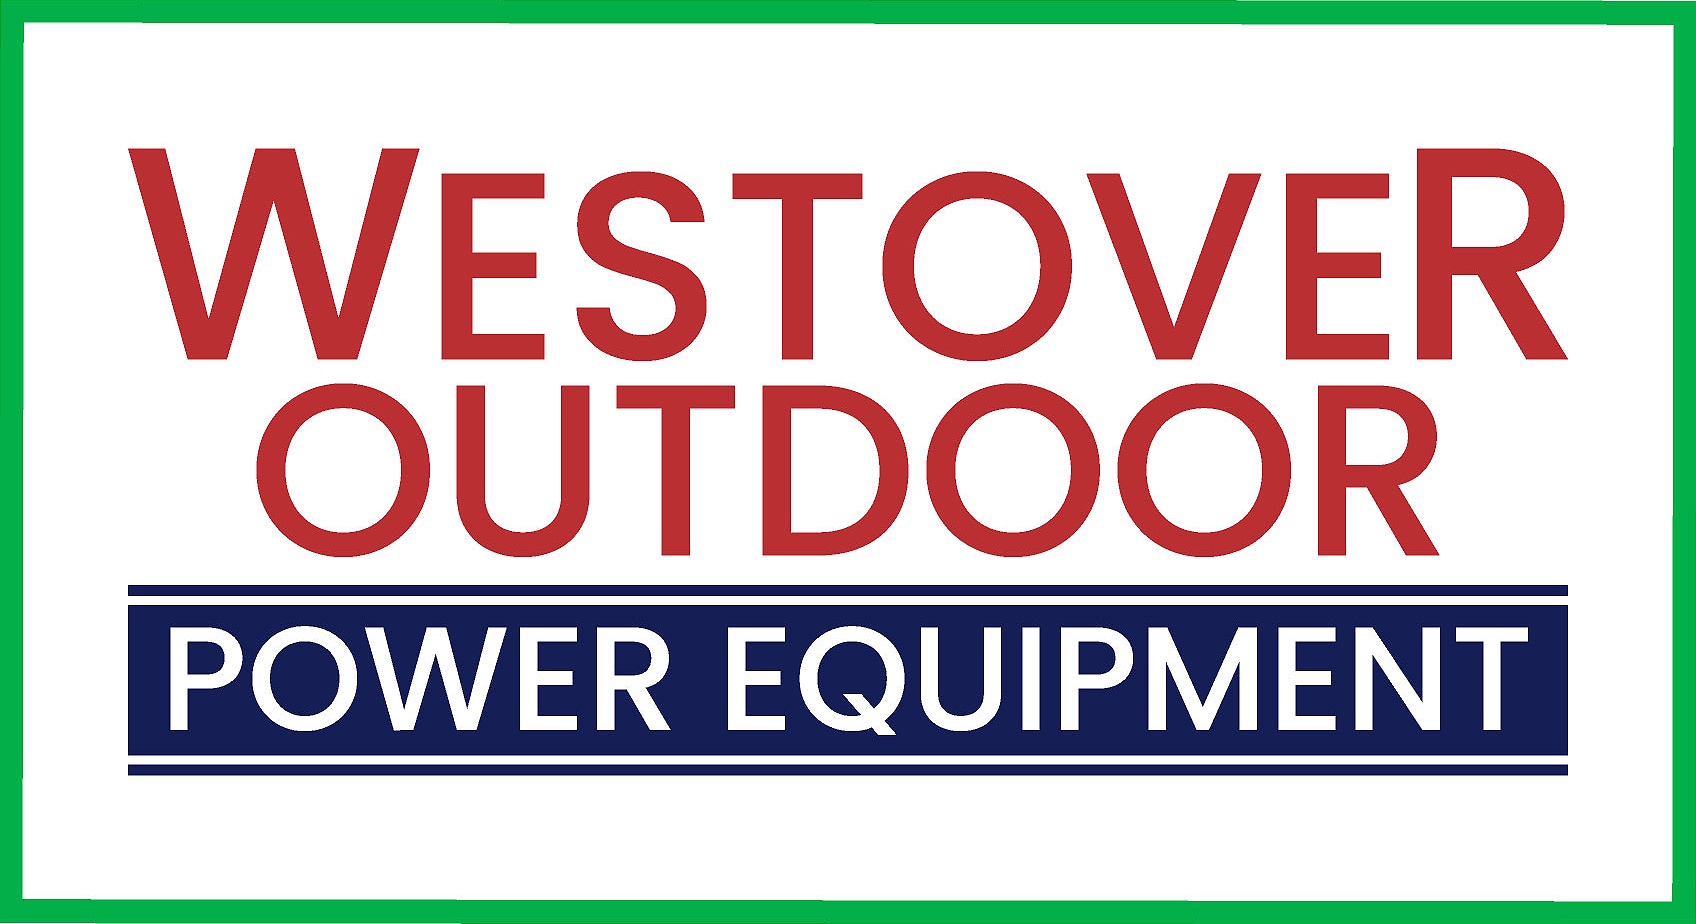 A picture of the logo for westover outdoor power equipment.